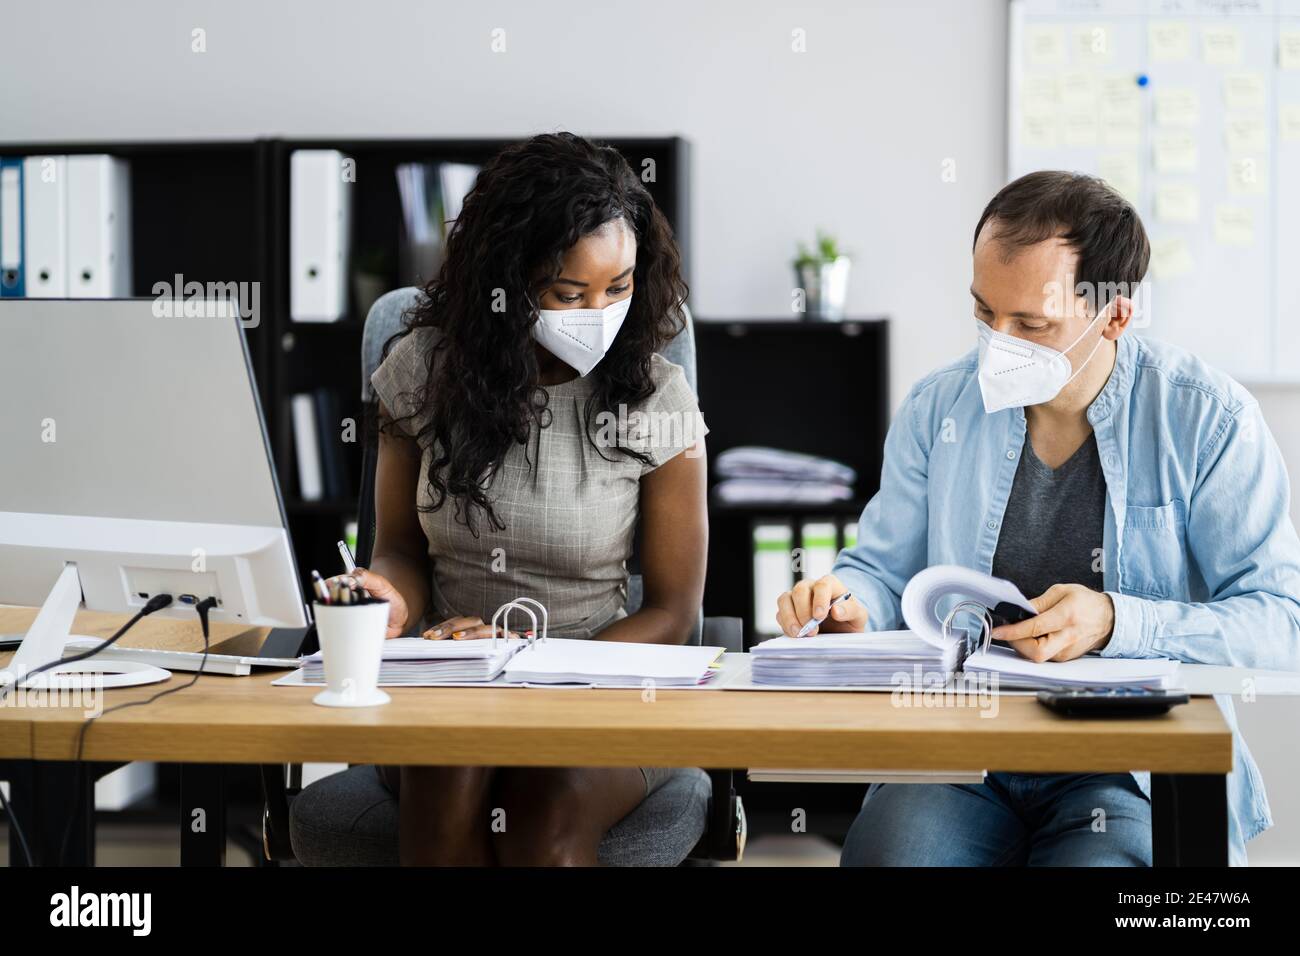 African American Accountant Business People In Face Mask Stockfoto